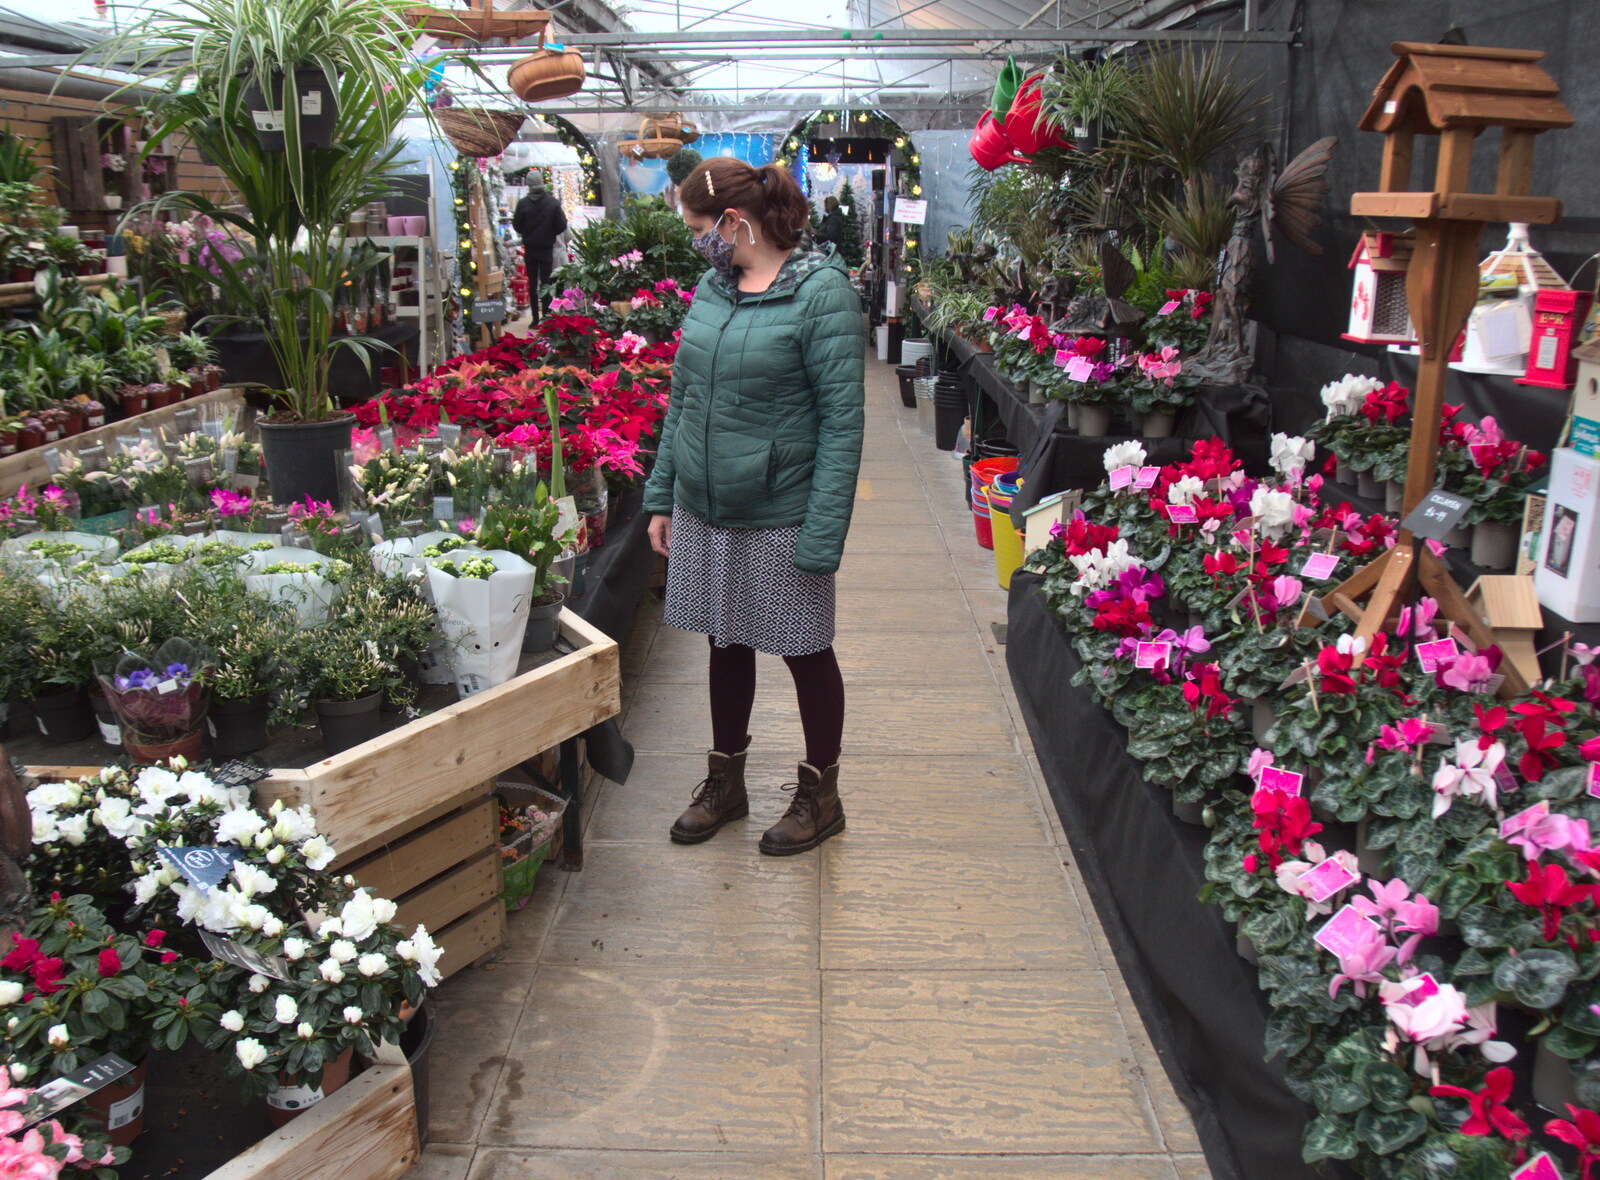 Isobel looks at plants from Frosty Rides and a Christmas Tree, Diss Garden Centre, Diss, Norfolk - 29th November 2020